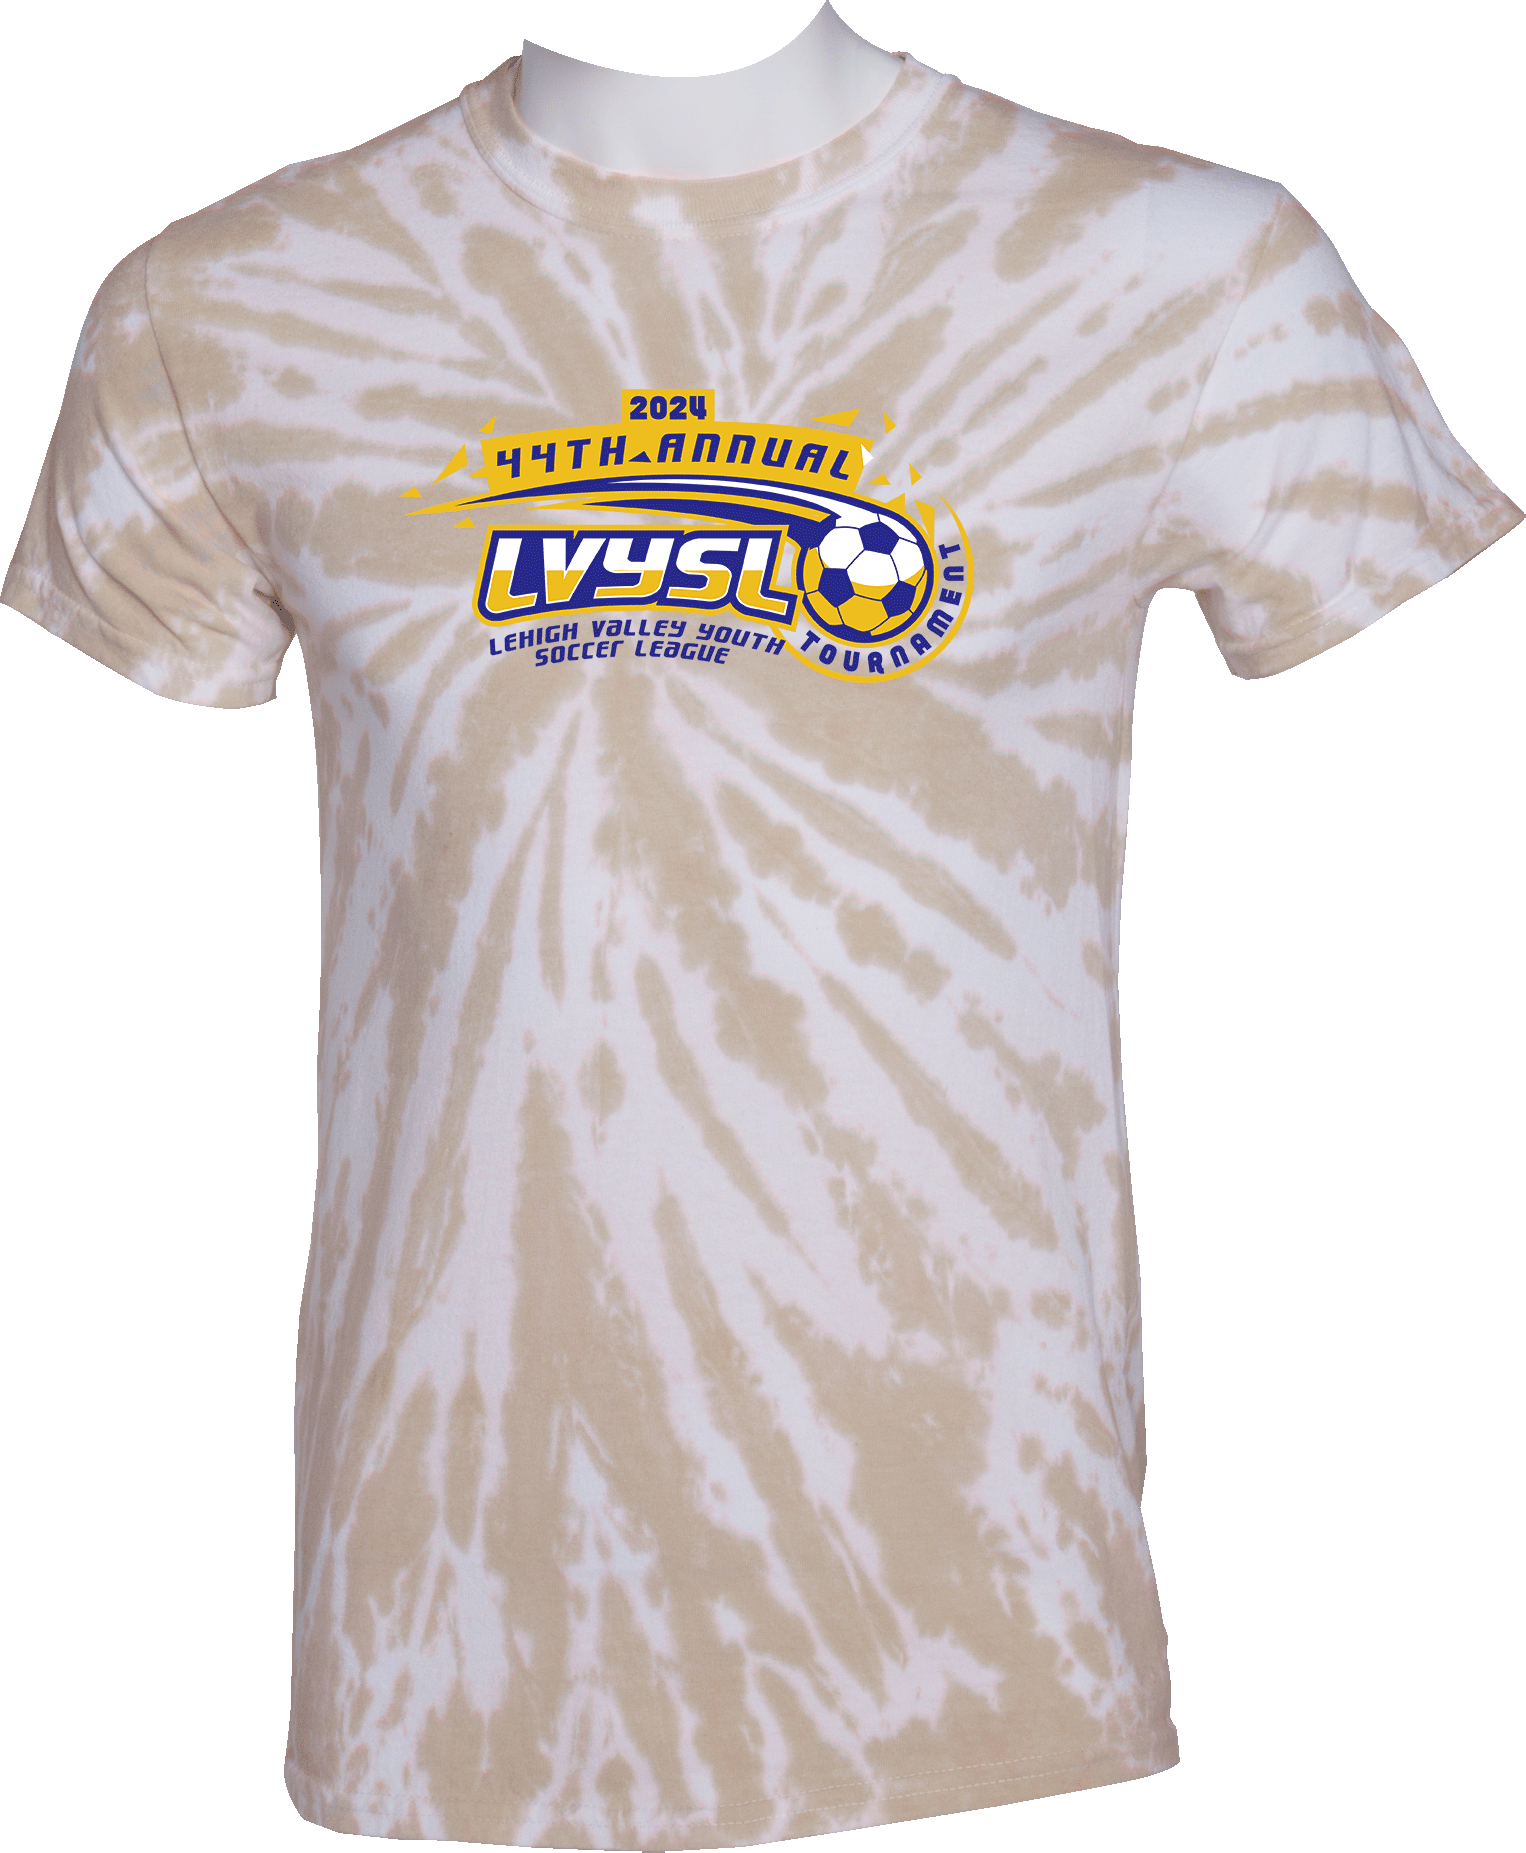 Tie-Dye Short Sleeves - 2024 44th annual Lehigh Valley Youth Soccer League Tournament